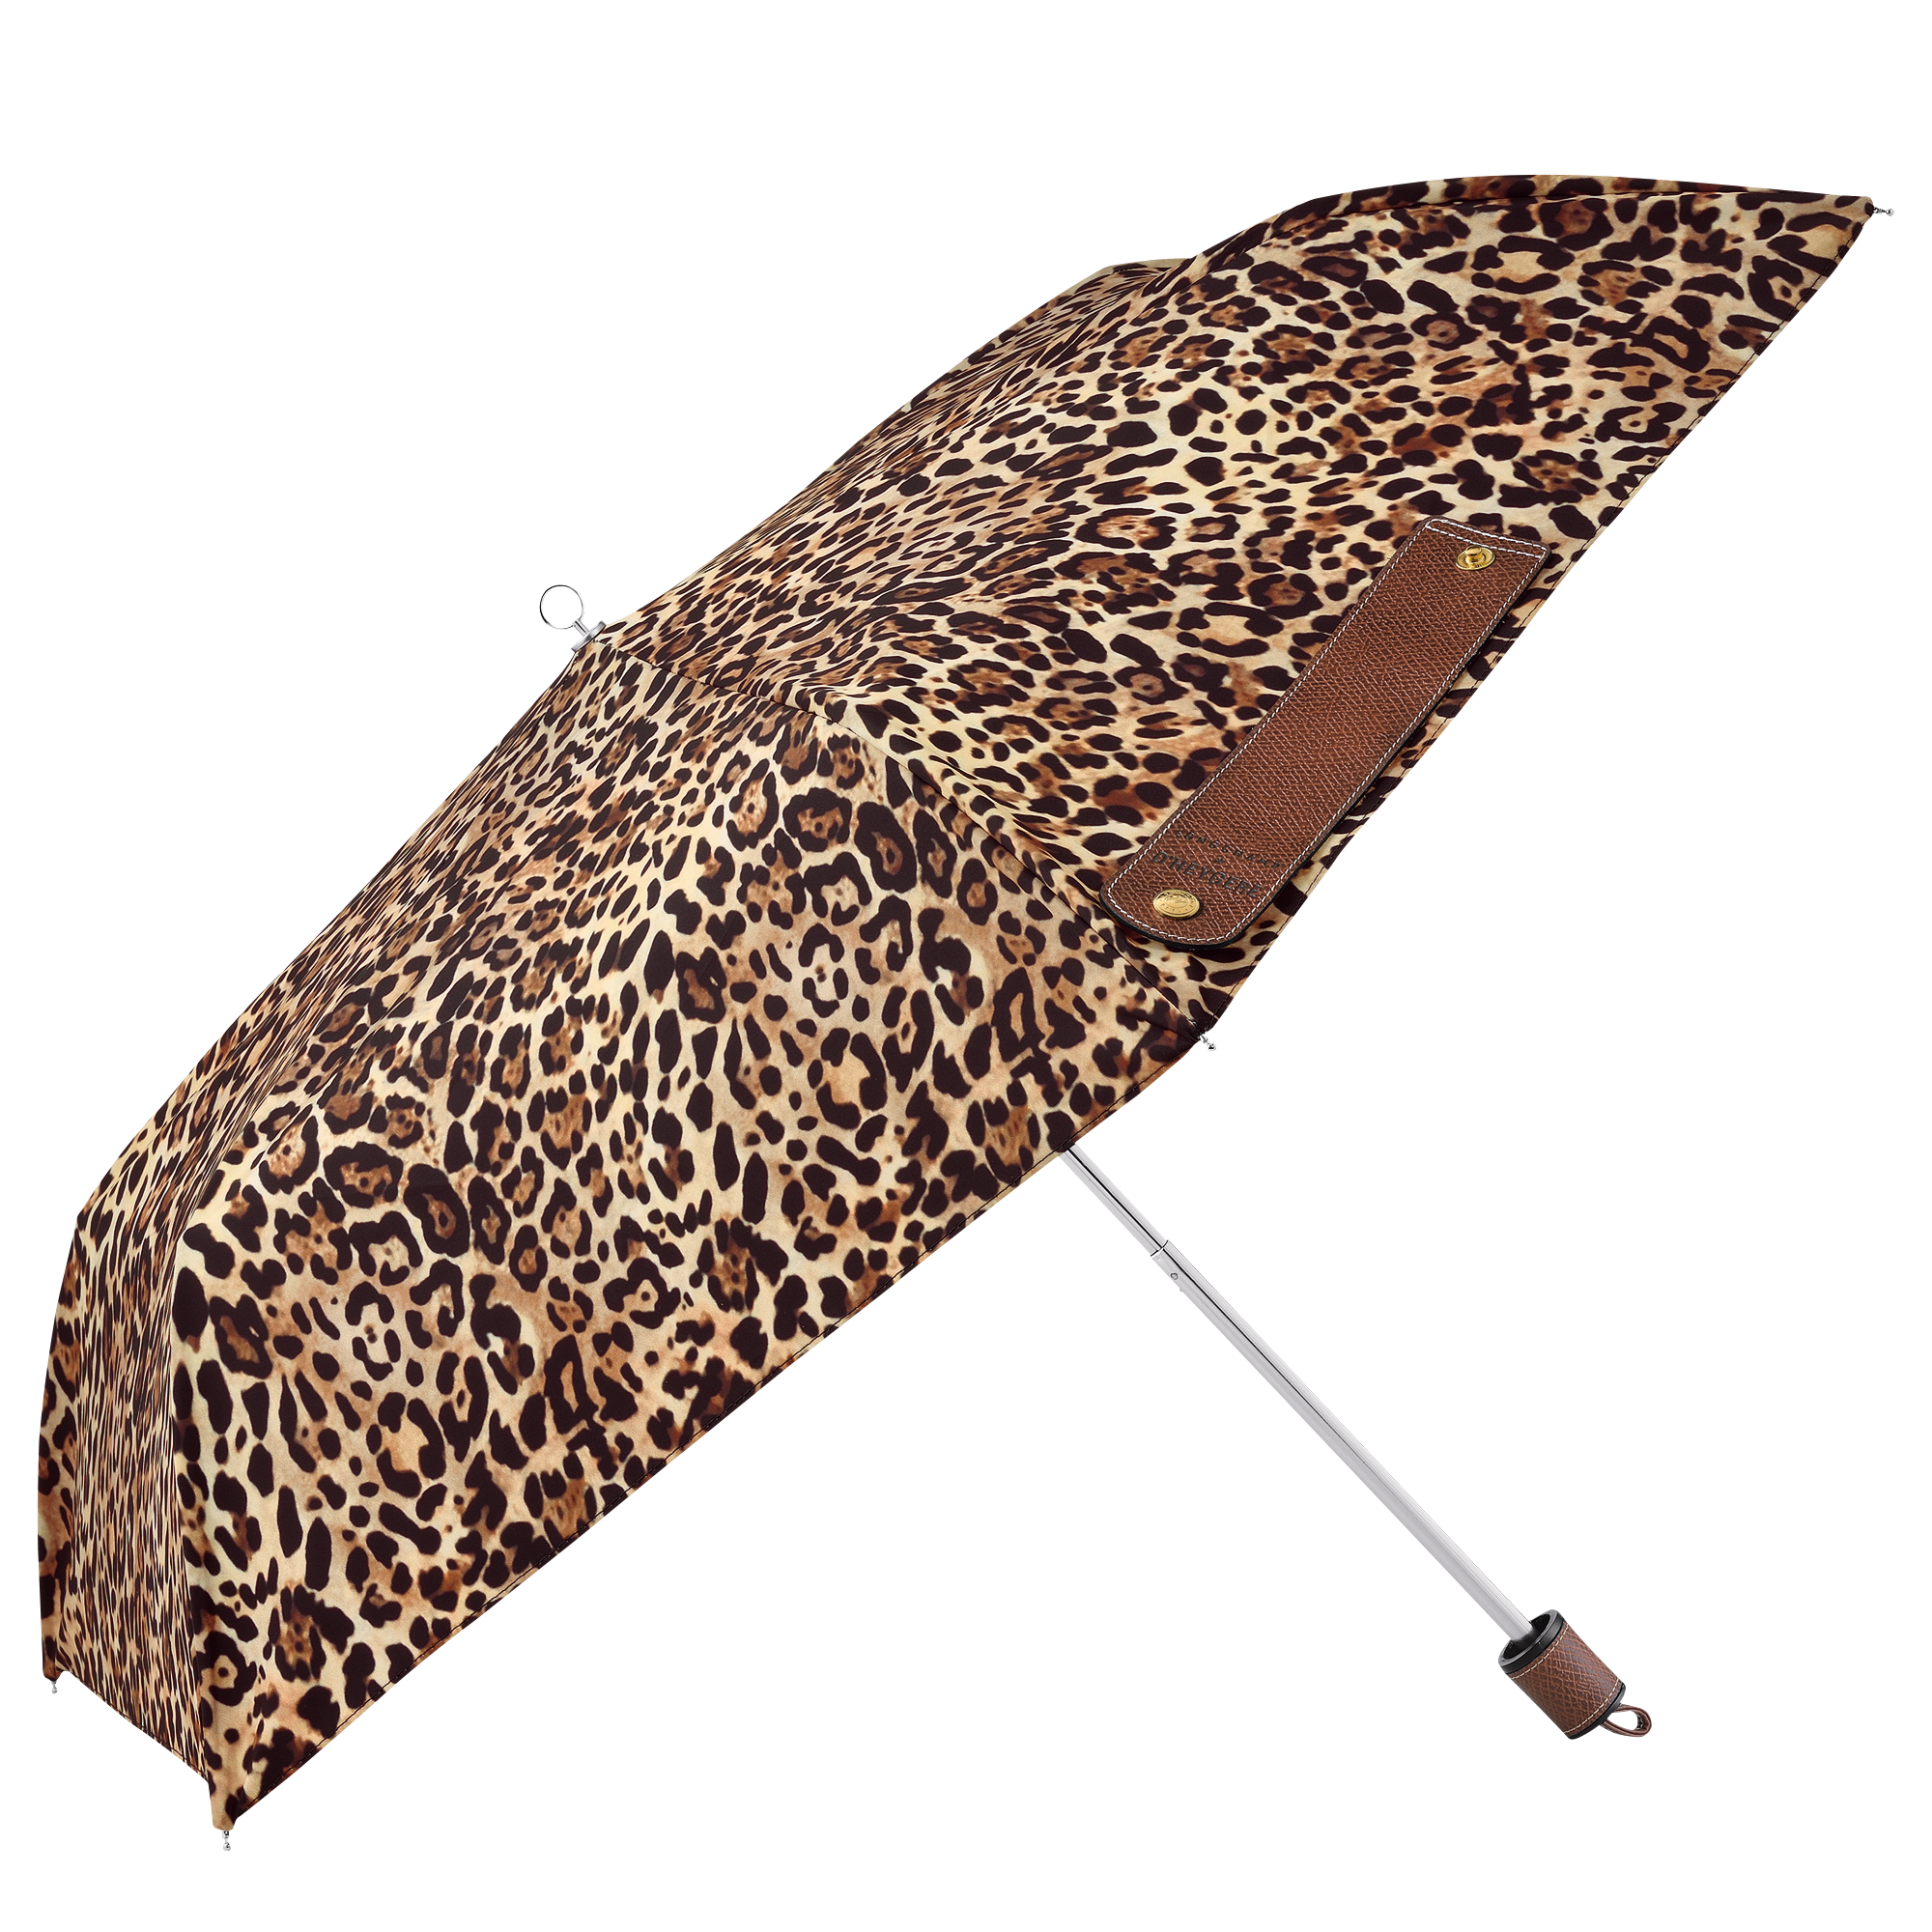 Longchamp X D_heygere animal print umbrella with strap  Php 12,500.png